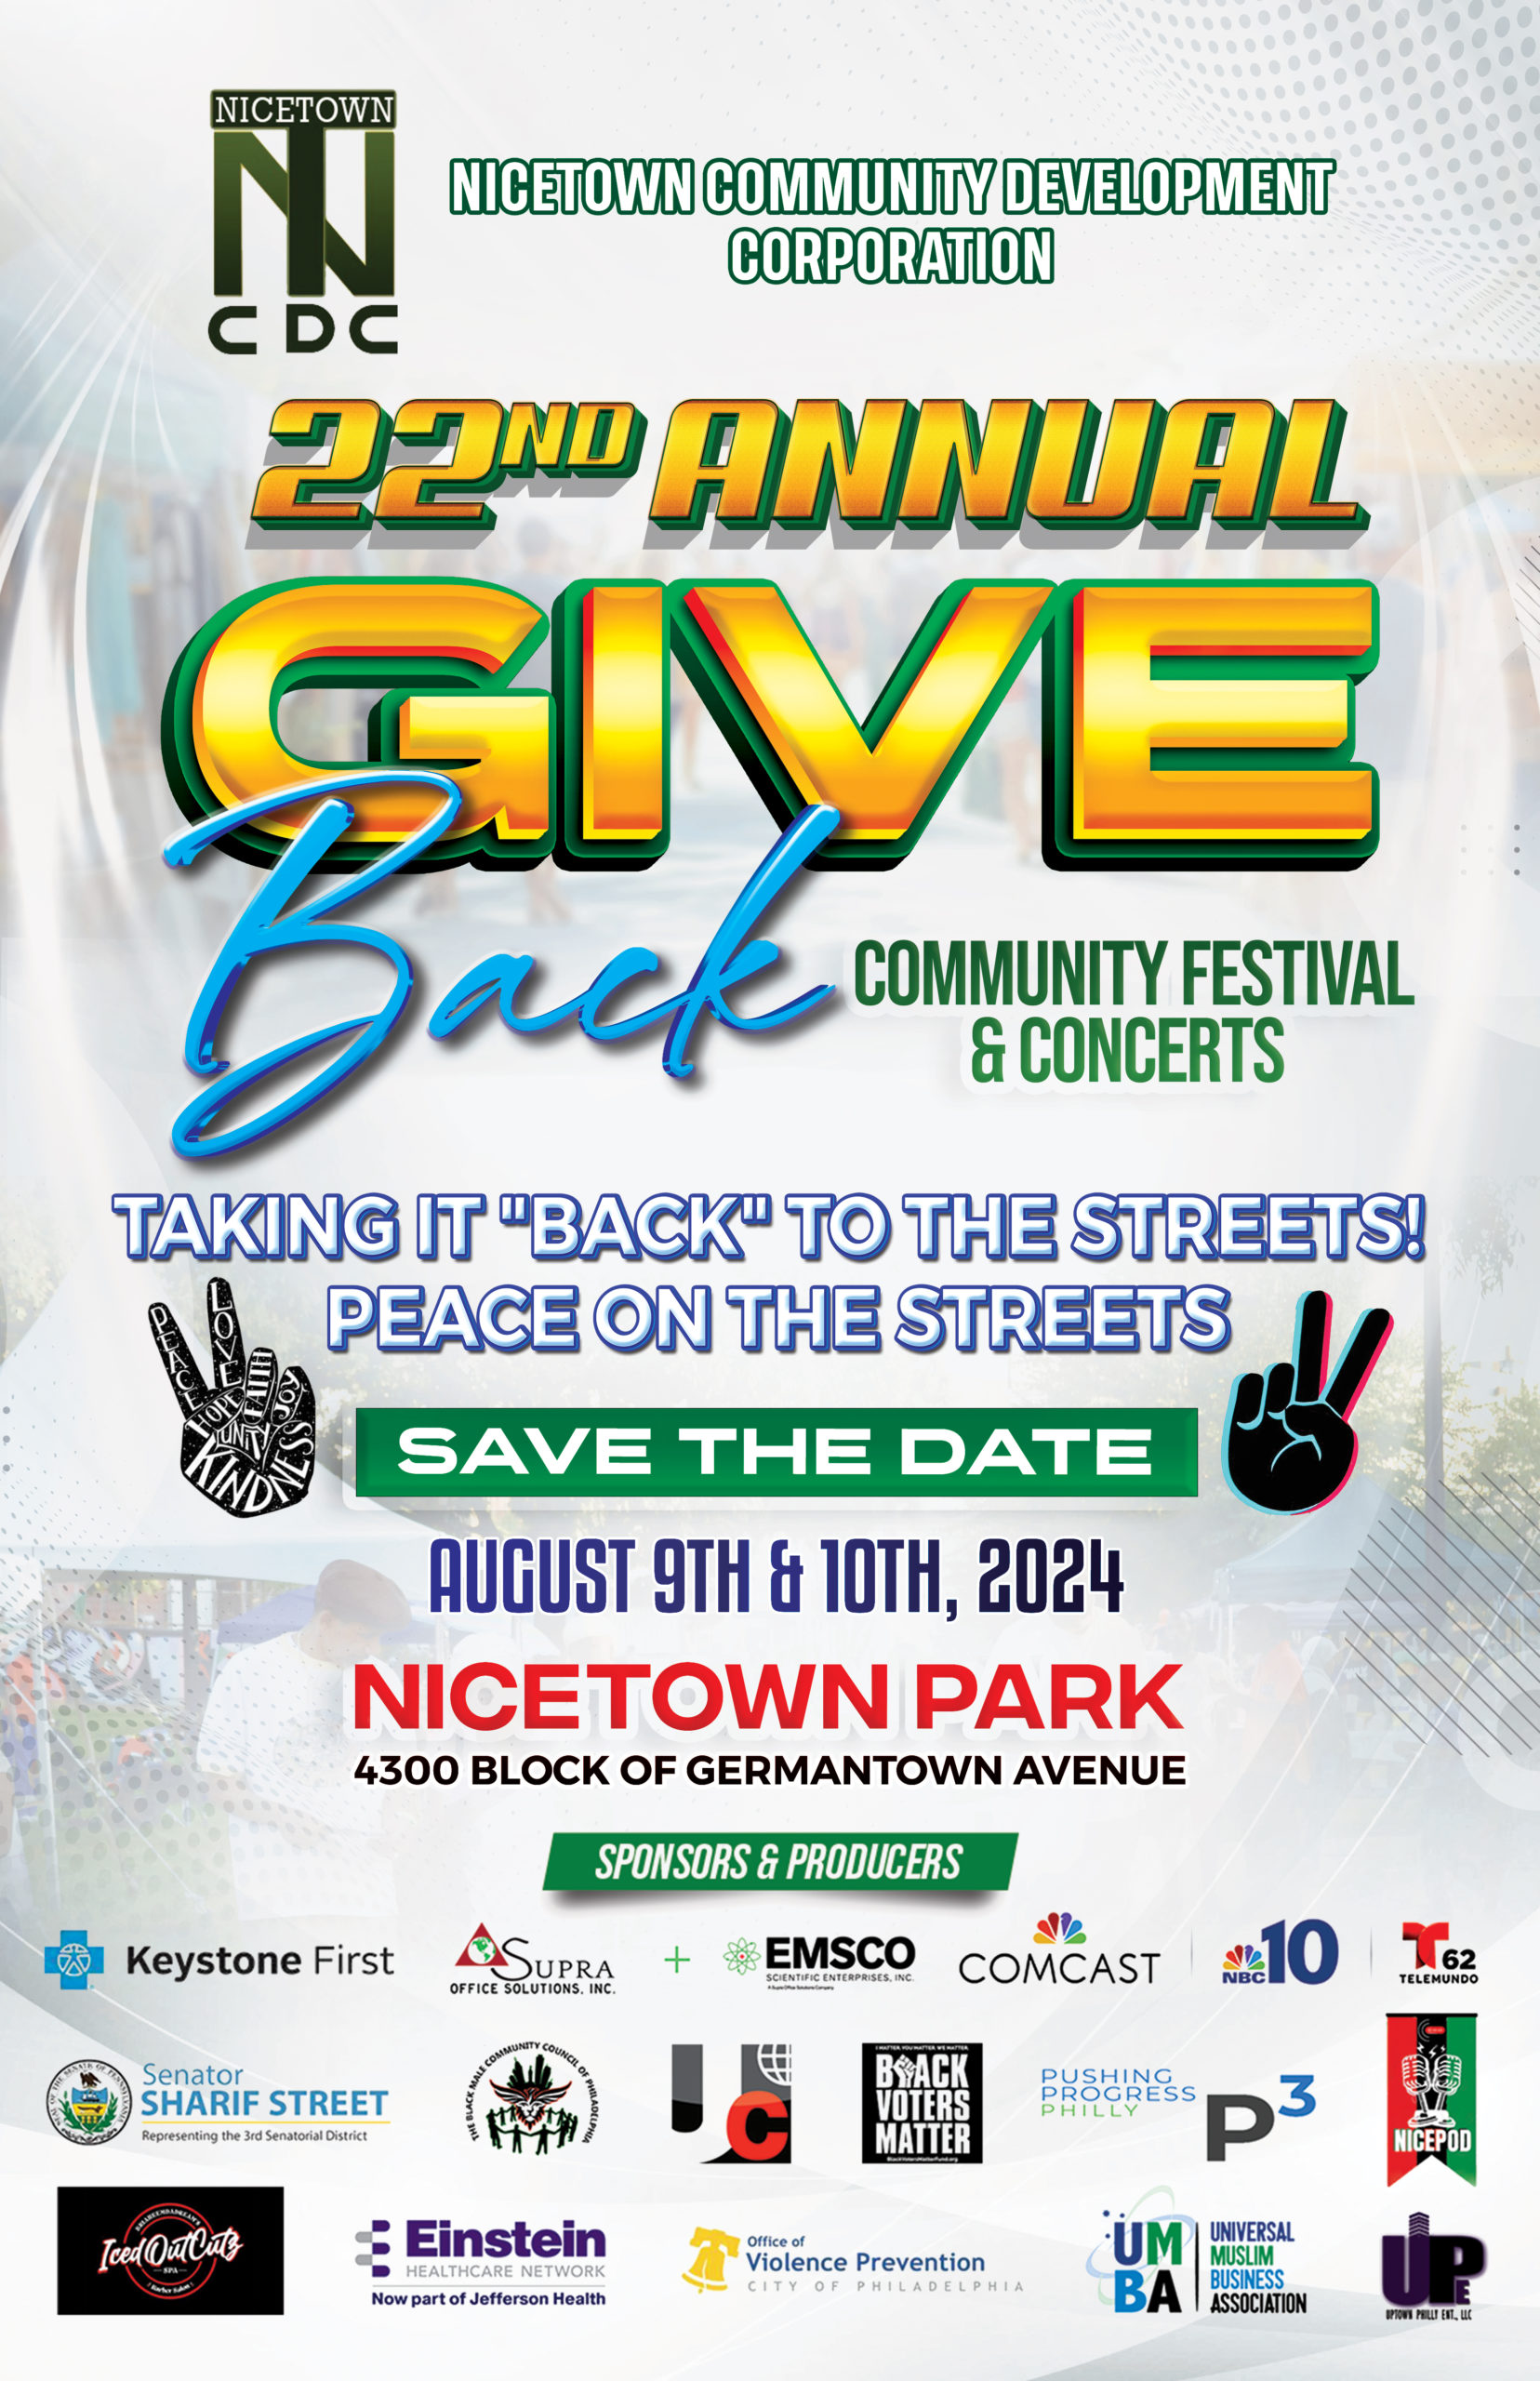 22nd Annual Give Back Community Festival and Concerts